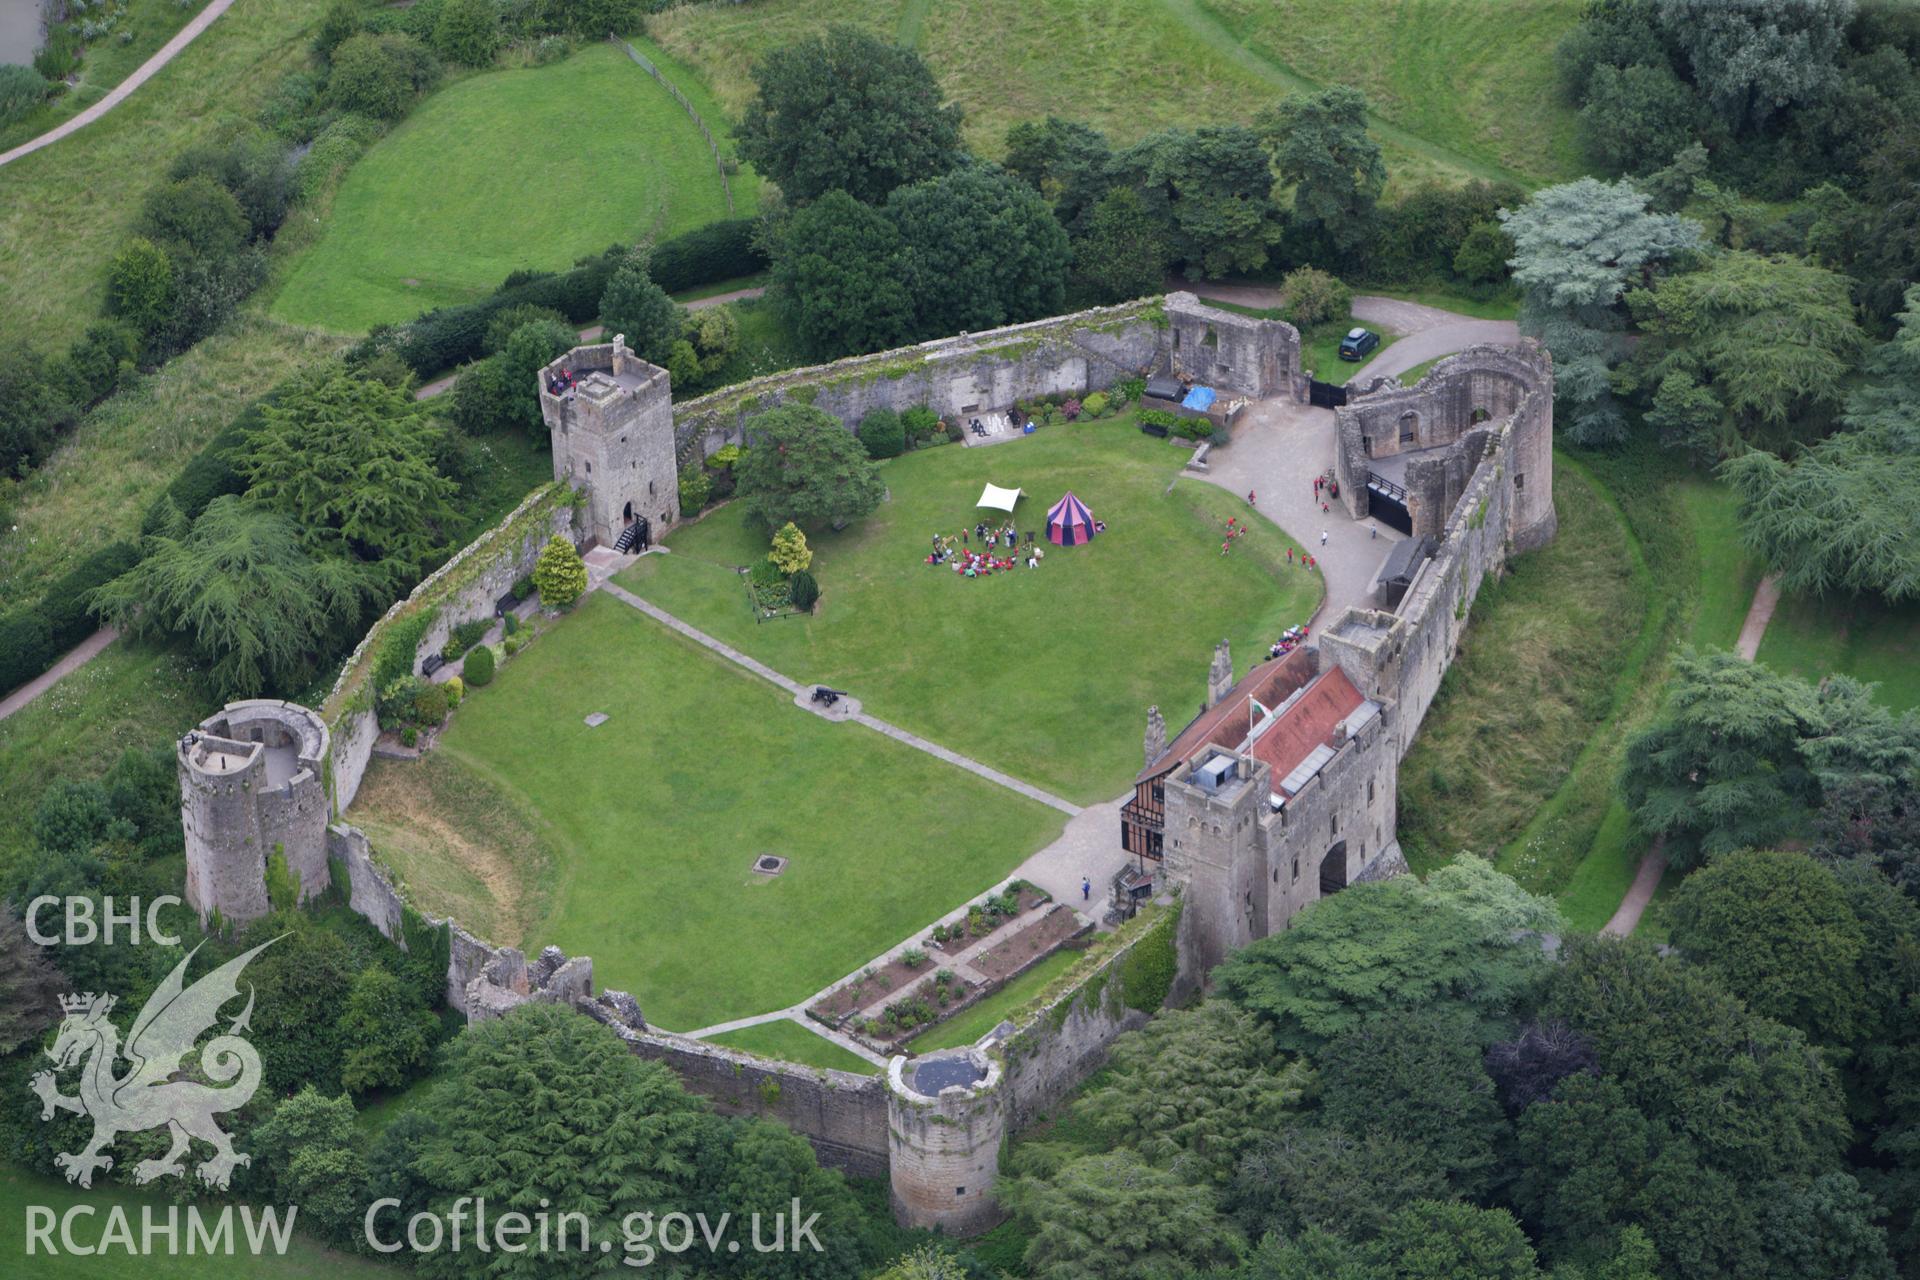 RCAHMW colour oblique aerial photograph of Caldicot Castle. Taken on 09 July 2009 by Toby Driver